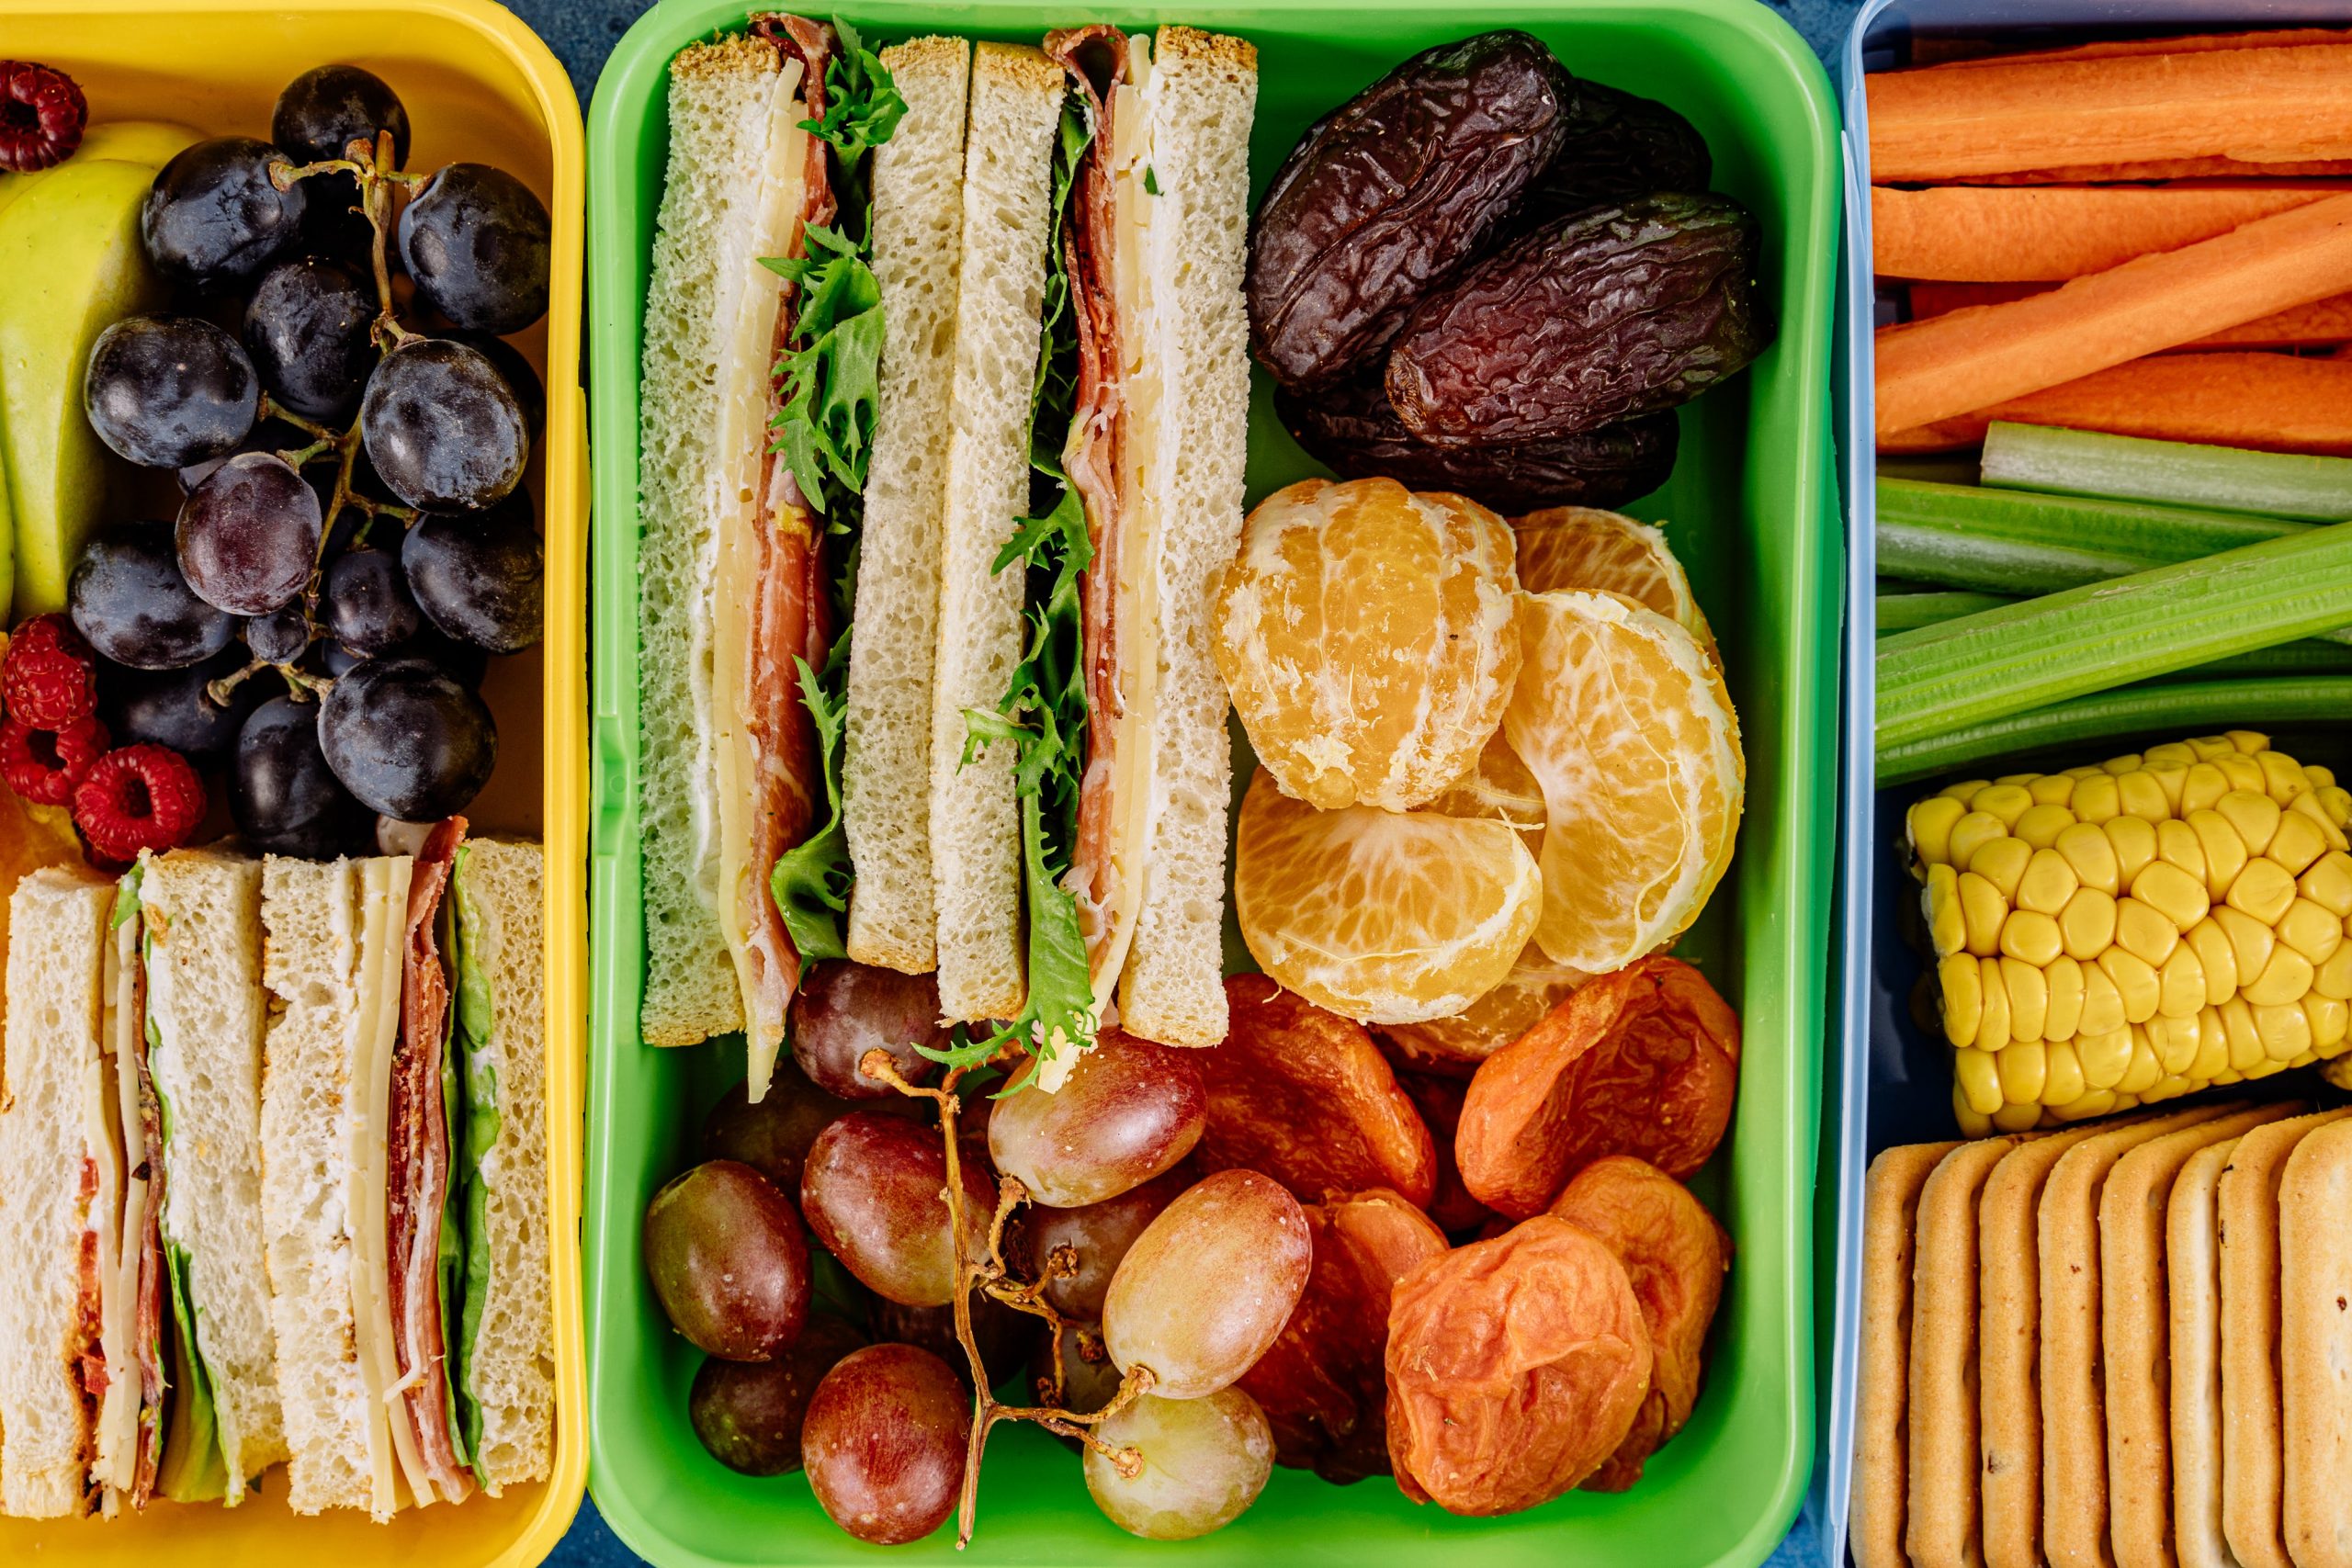 What should I pack in my child’s lunchbox for pre-school?